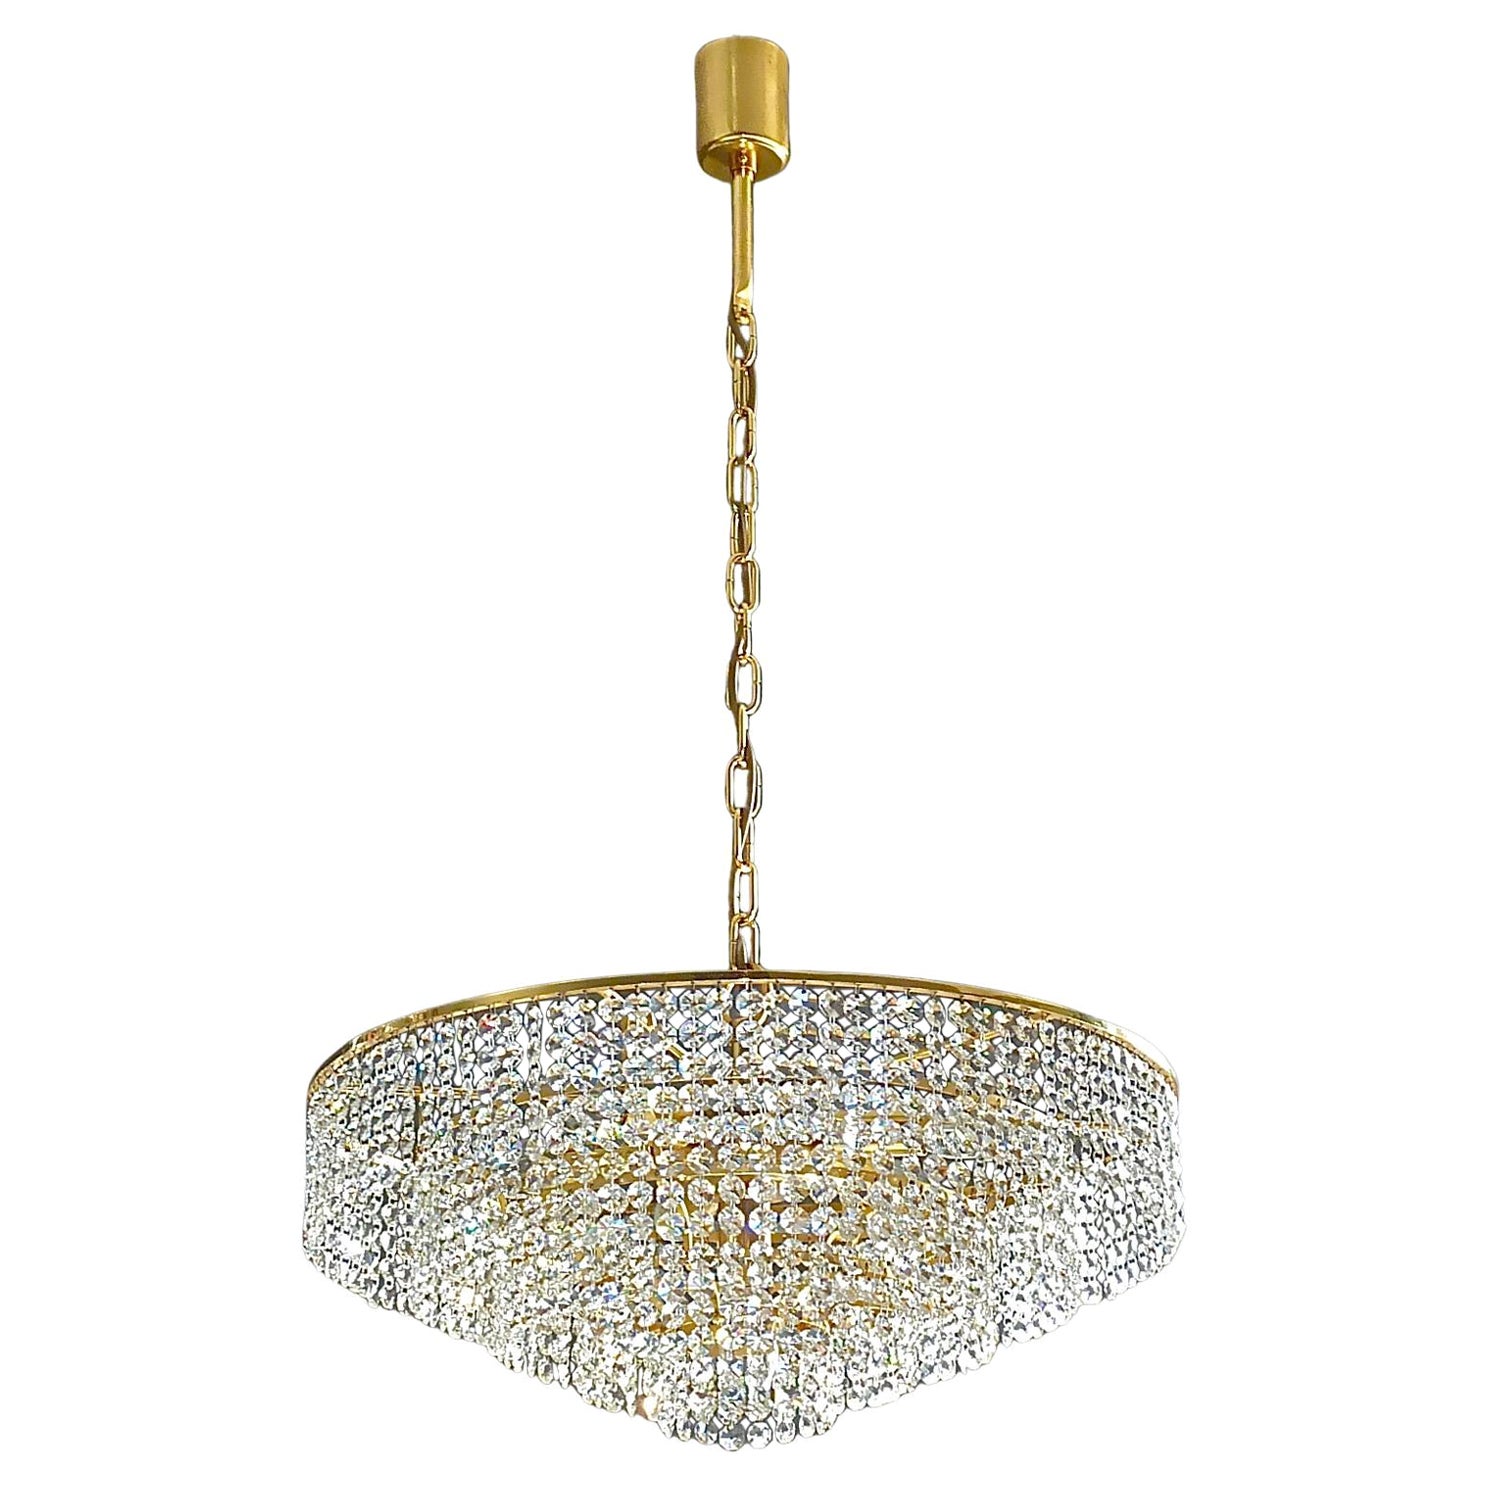 Large German Palwa Cascading Chandelier Gilt Brass Faceted Crystal Glass, 1960s For Sale